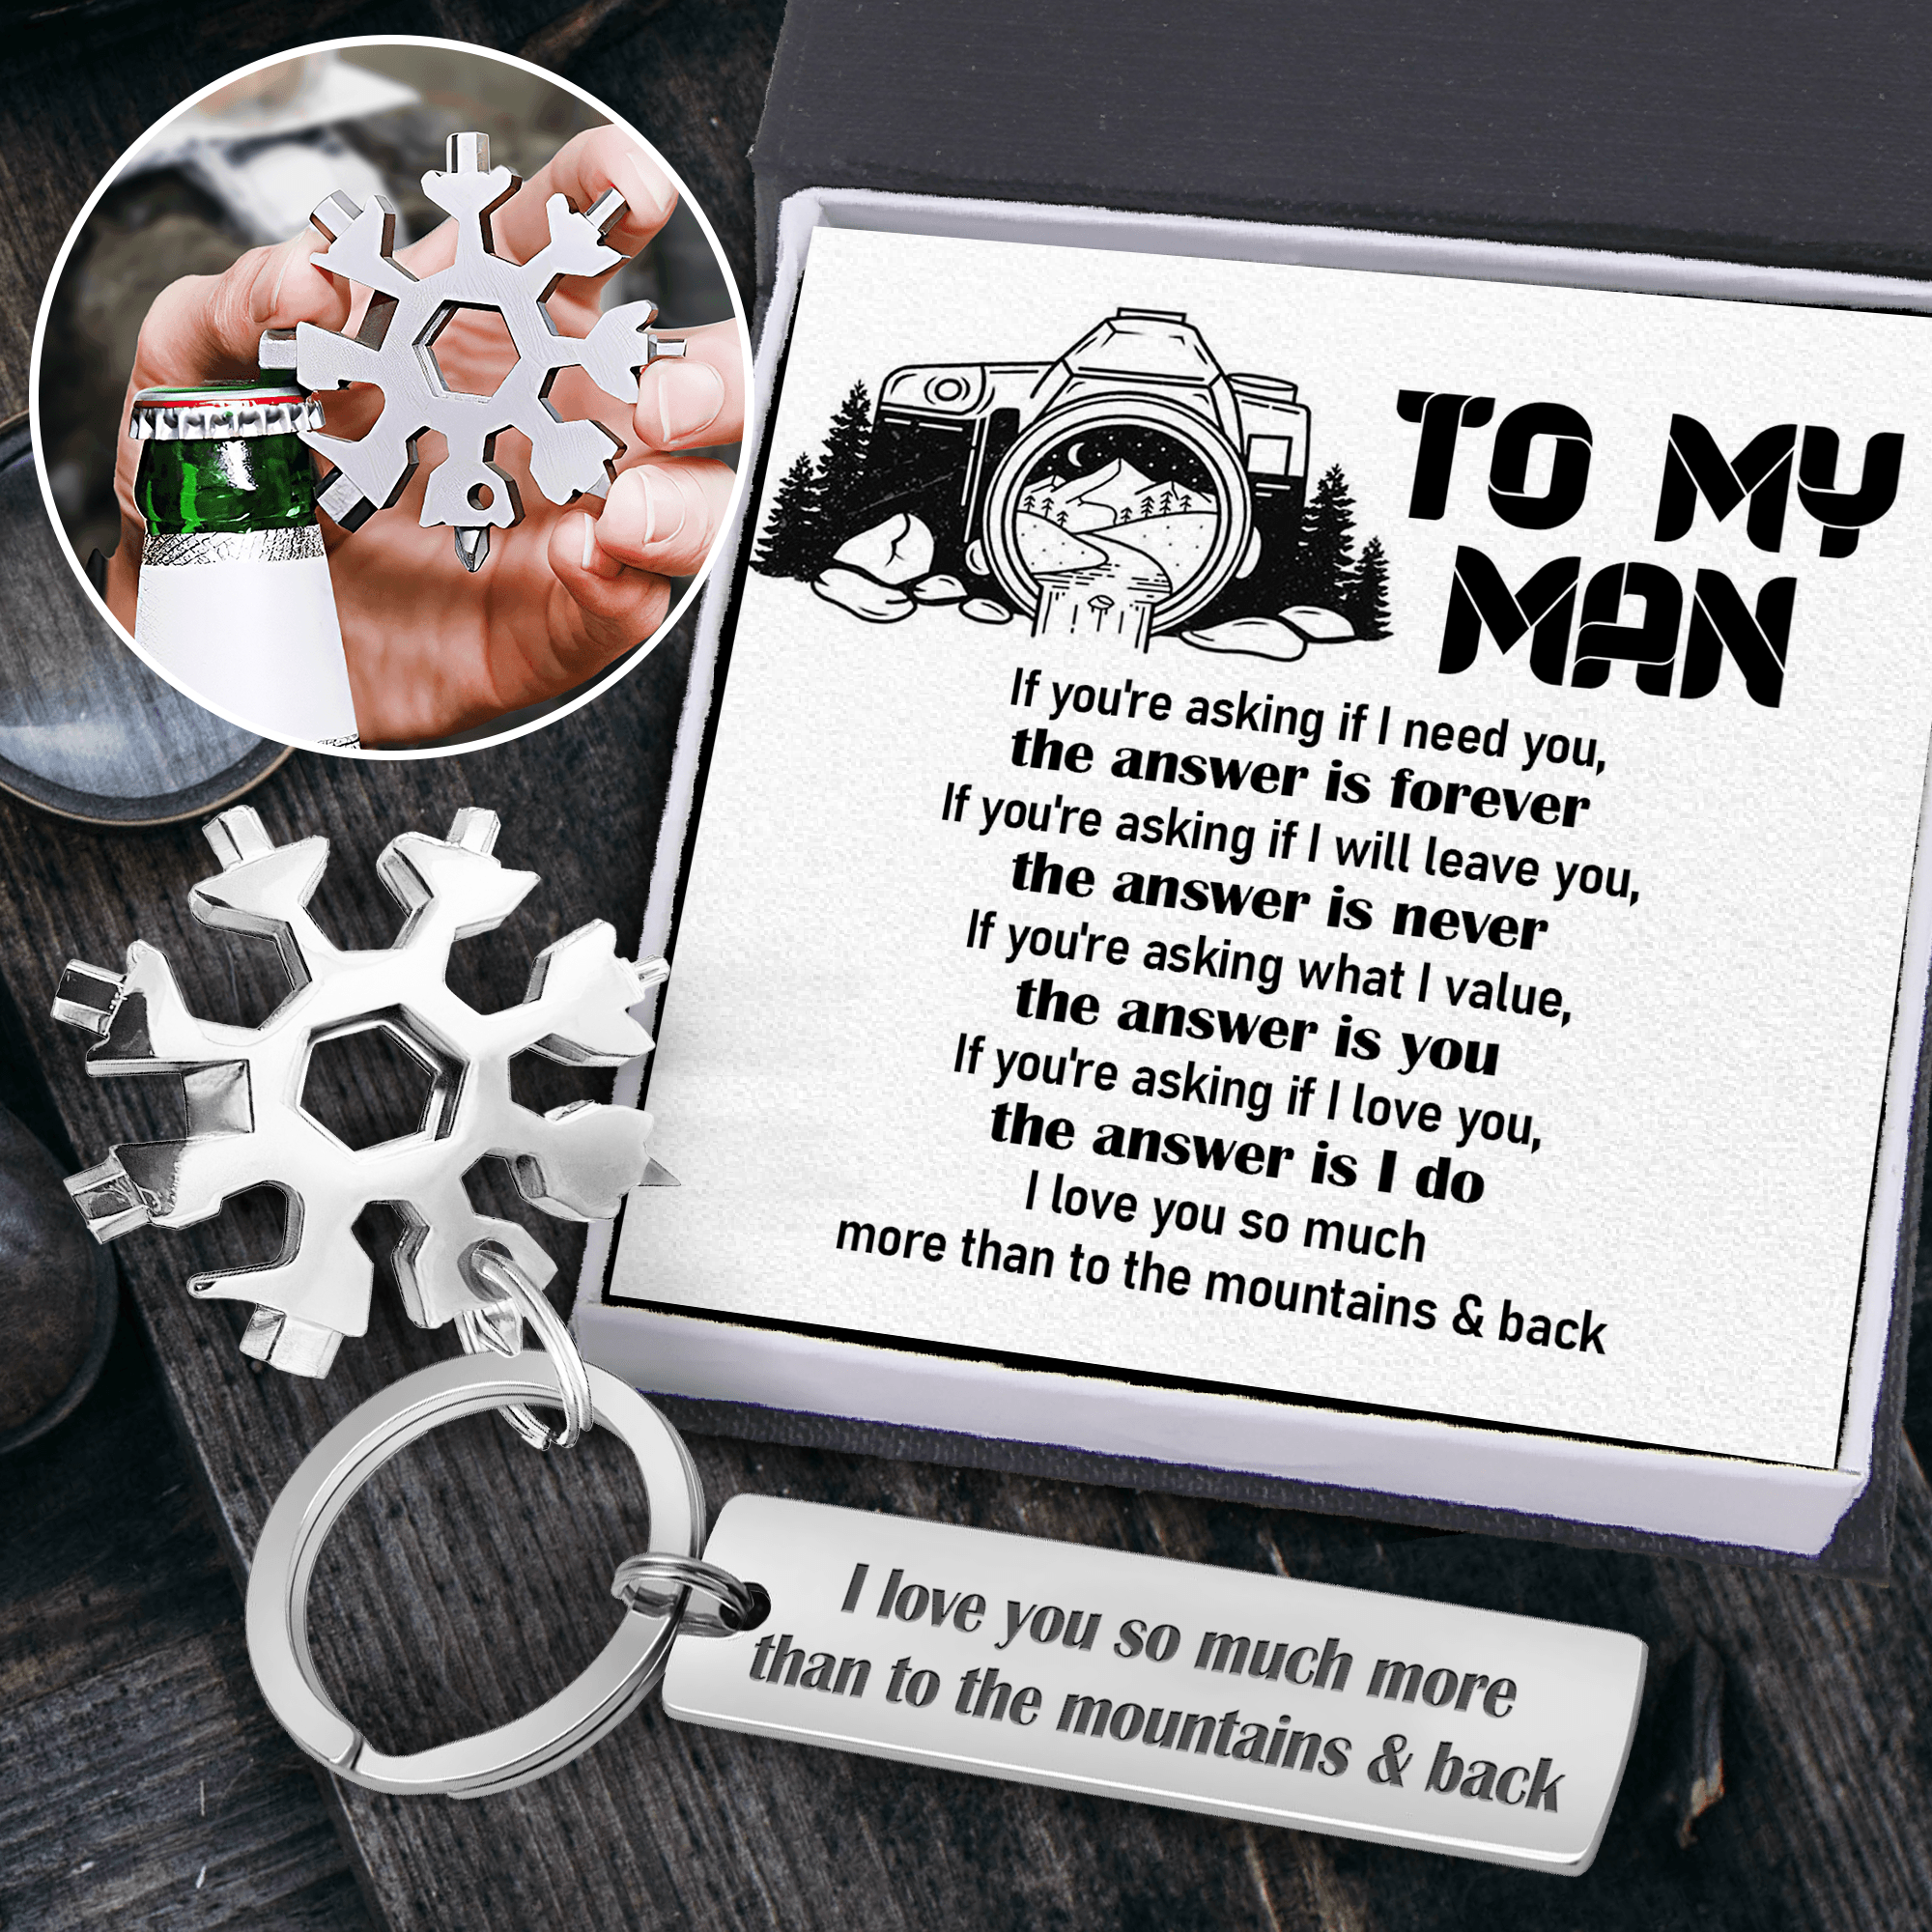 Multitool Keychain - Hiking - To My Man - I Love You So Much More Than To The Mountains & Back - Augktb26007 - Gifts Holder